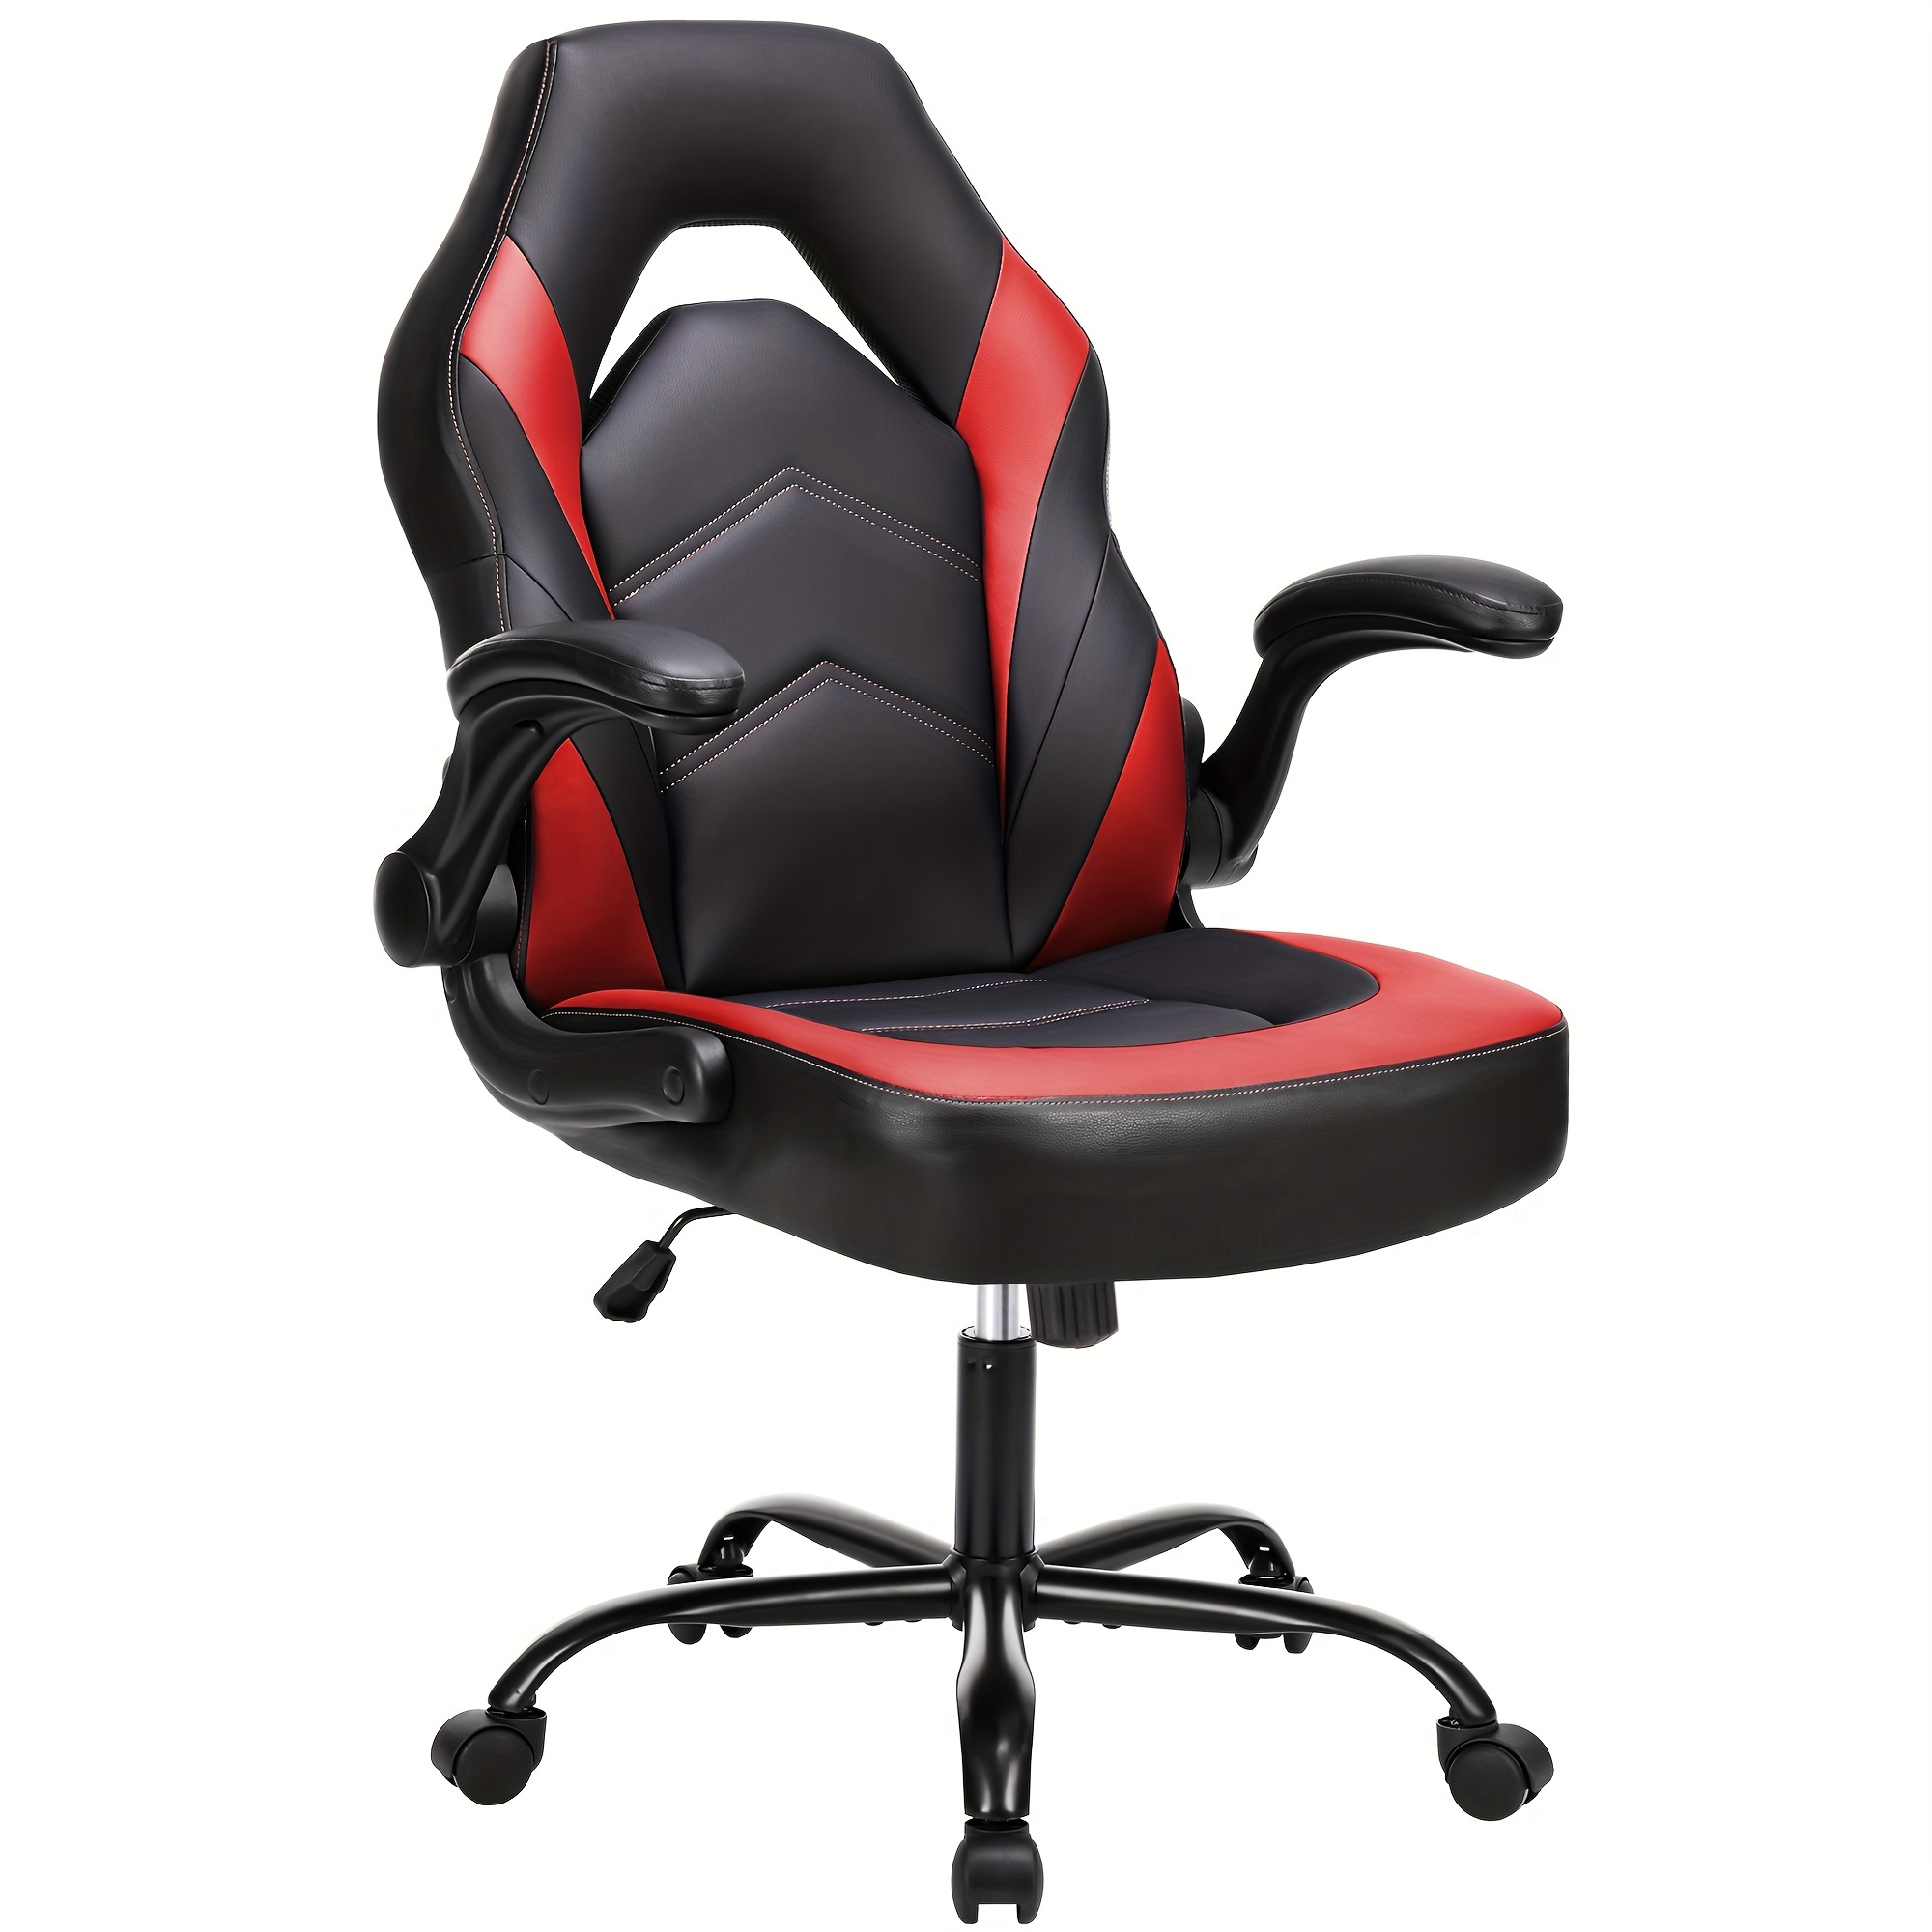 

Computer Gaming Chair, Office Desk Pu Leather Chair With Padded High Back Flip-up Armrests, Swivel Task Chair Adjustable Height For Adults Teens Kids